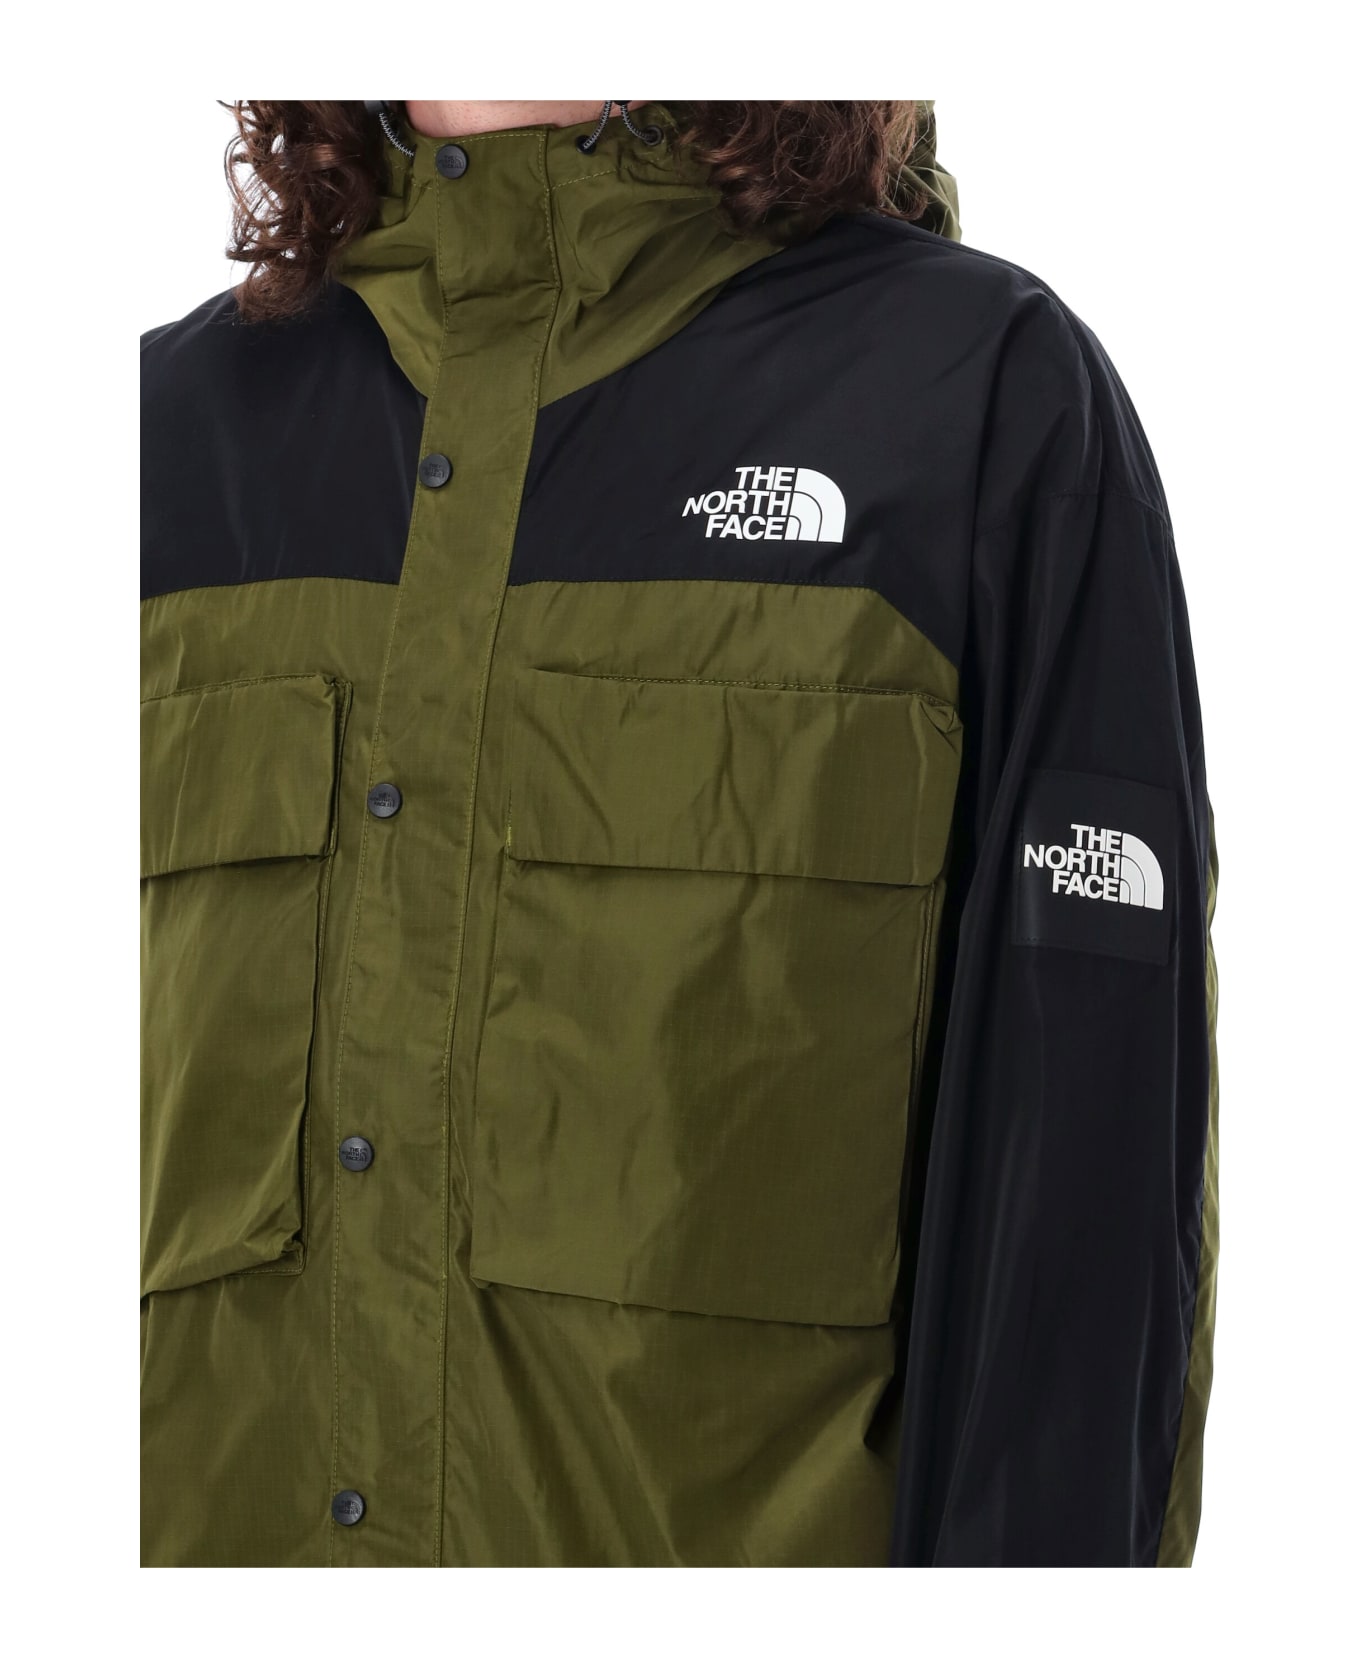 The North Face Tustin Cargo Pkt Jacket - OLIVE ブレザー